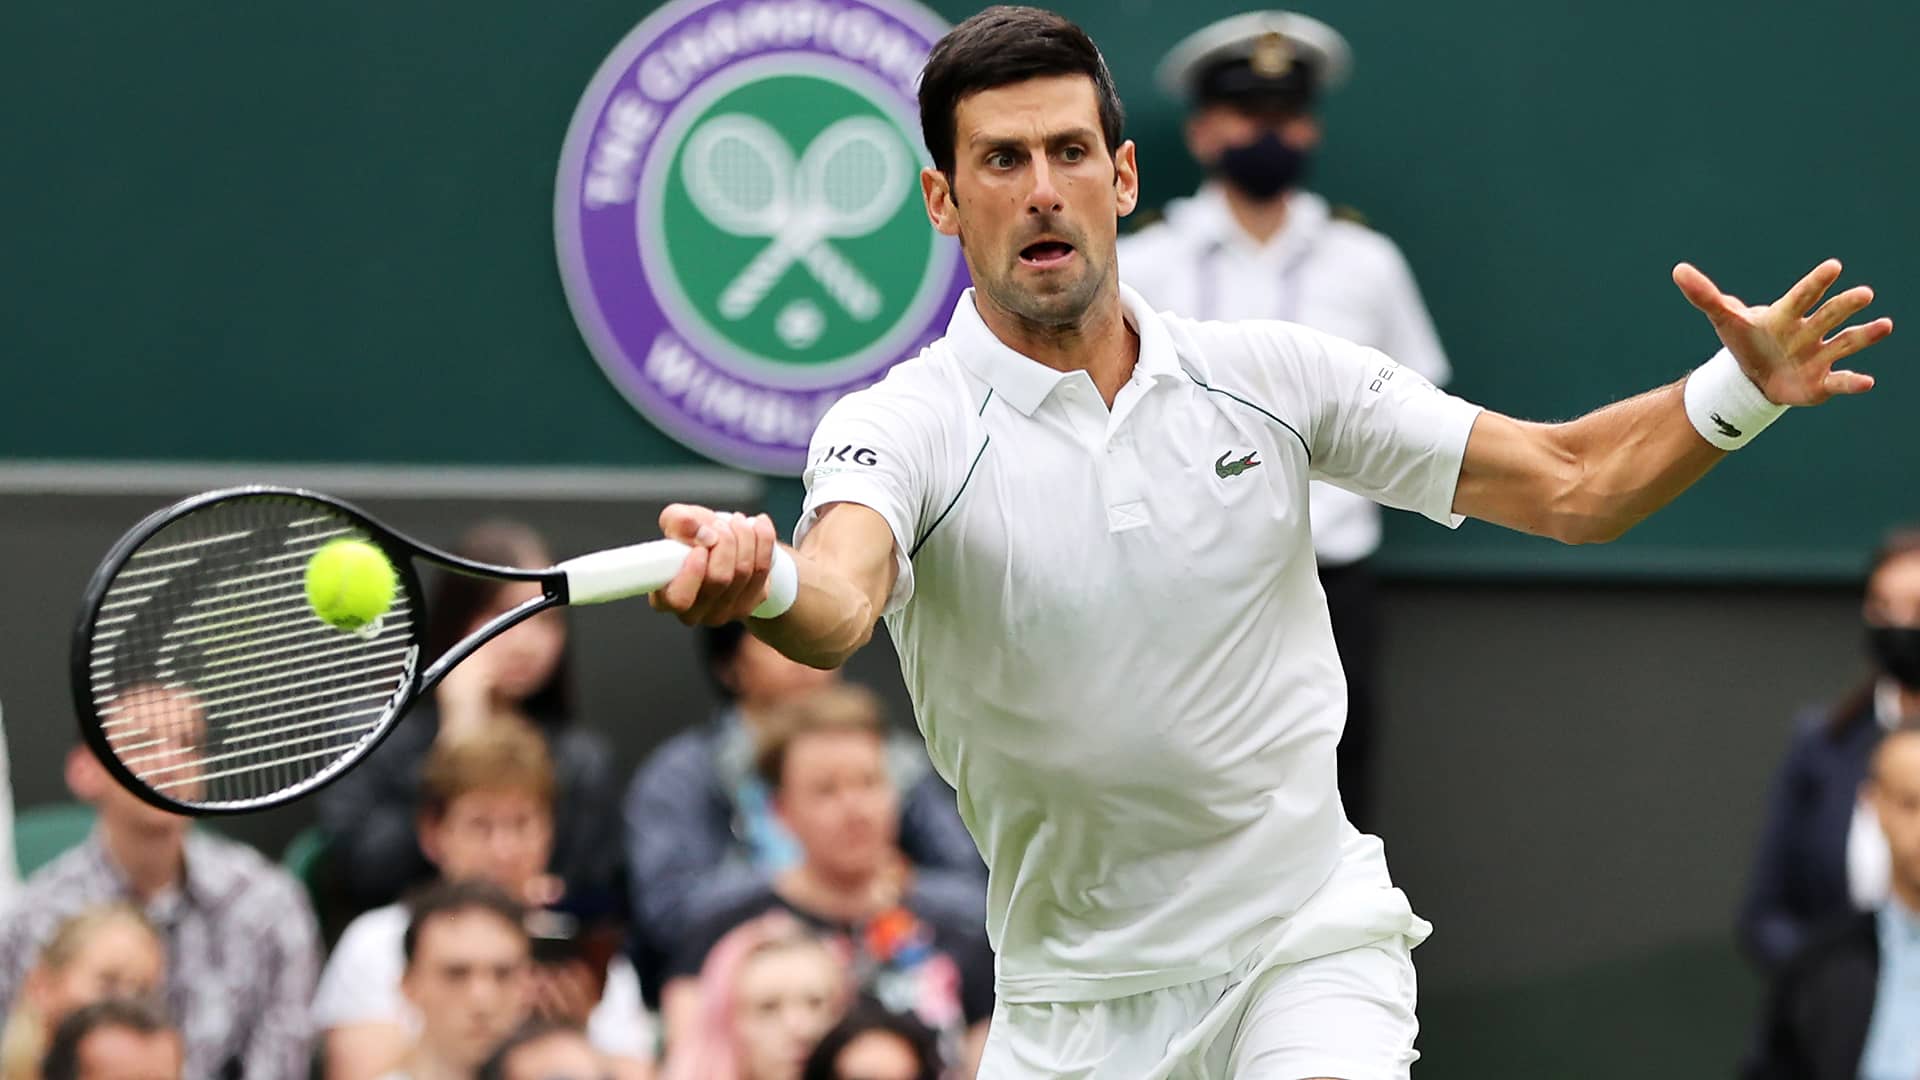 Wimbledon: Relief for World No.1 Novak Djokovic, Wimbledon to allow Djokovic to defend title despite refusal to get jabbed against COVID-19